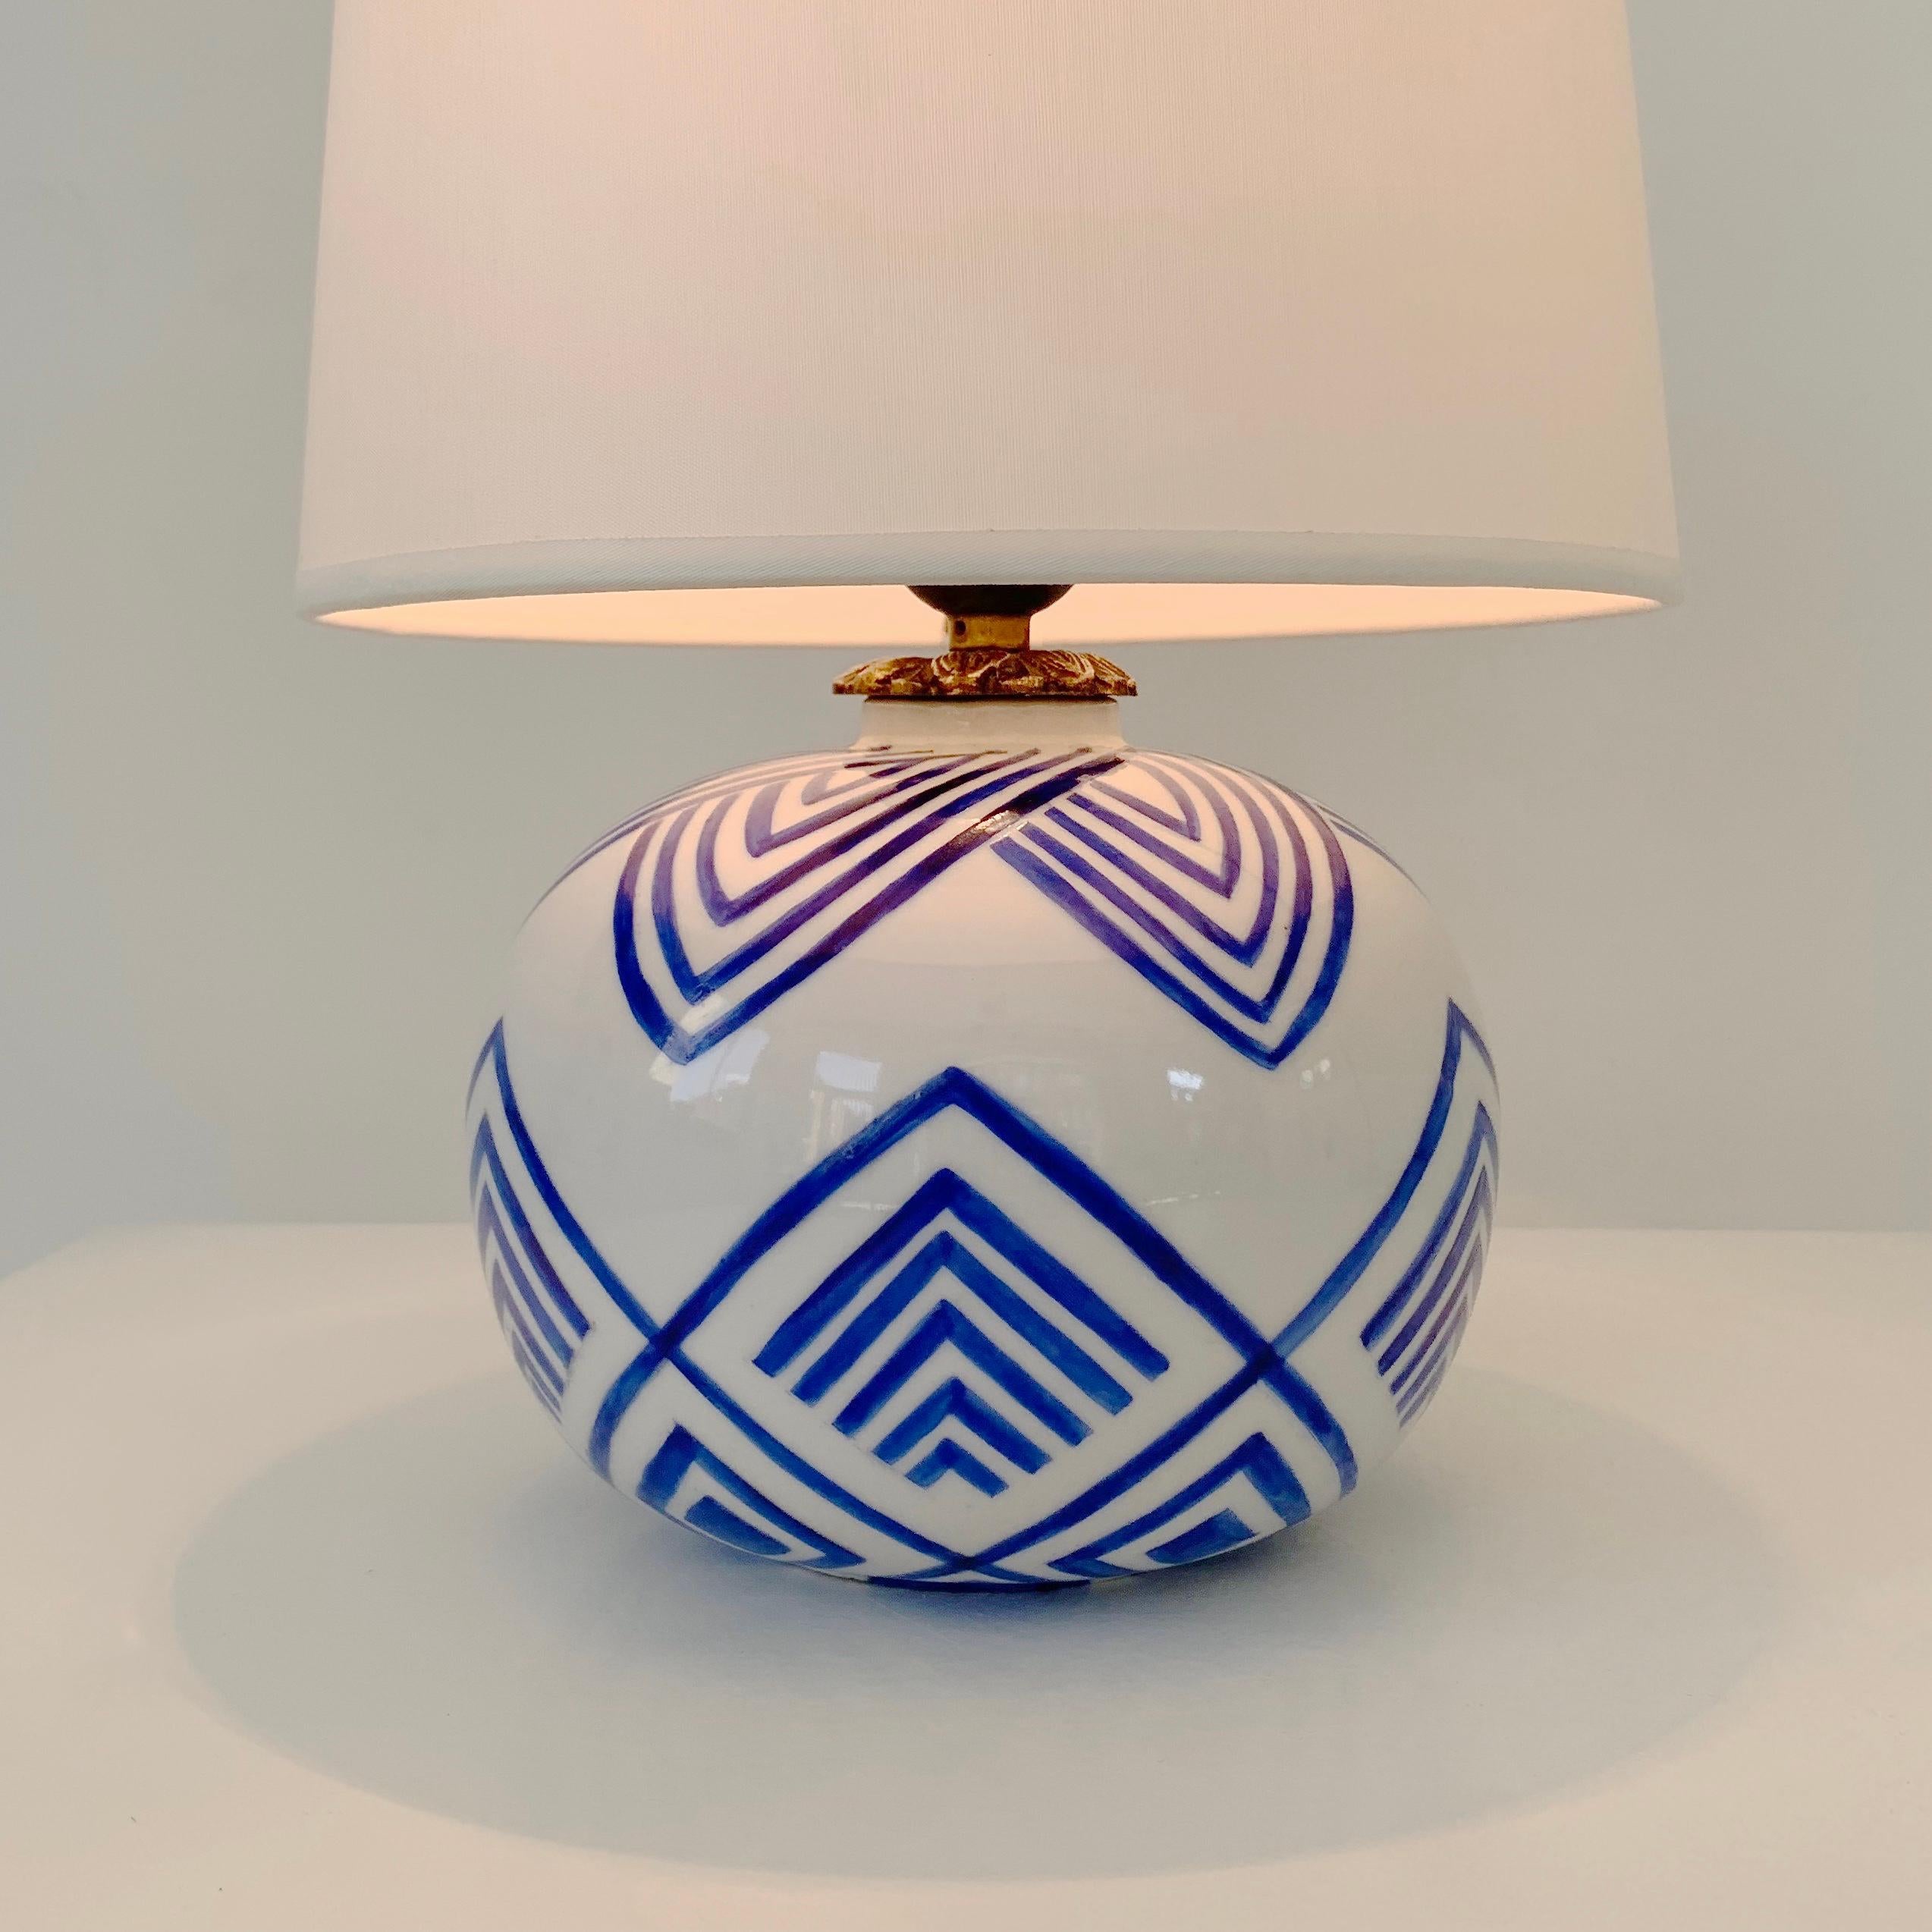 Mid-Century White and Blue Decorative Table Lamp, 1929, France. 1